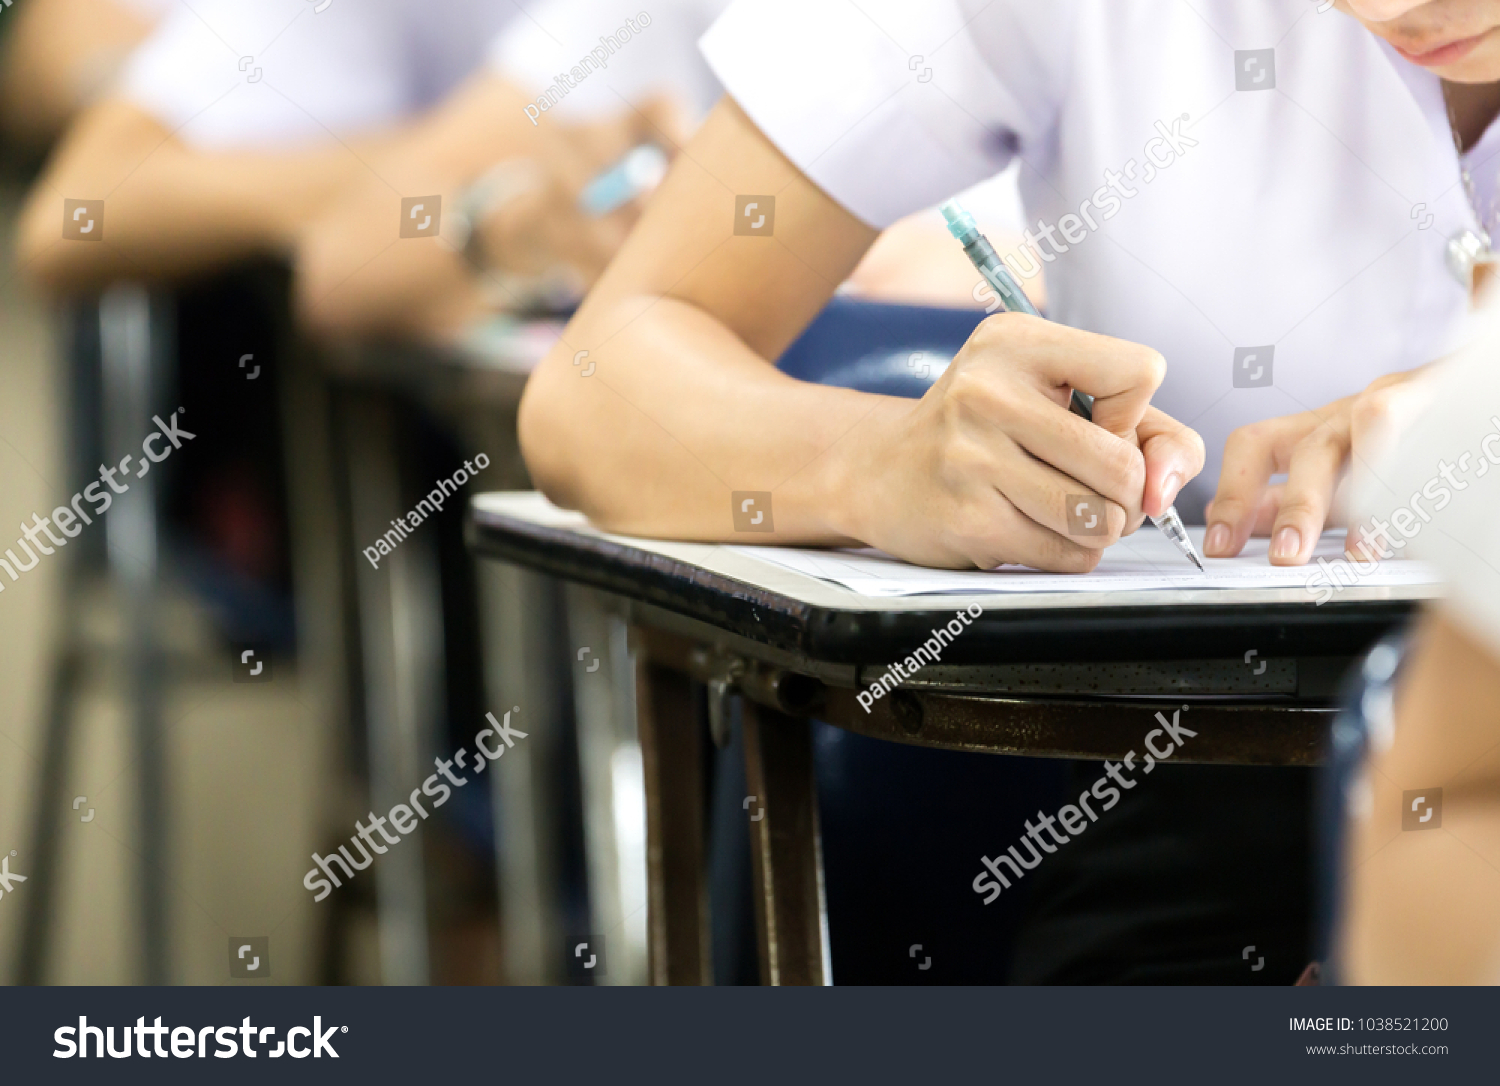 soft focus.high school or university student holding pencil writing on paper answer sheet.sitting on lecture chair taking final exam attending in examination room or classroom.student in uniform #1038521200